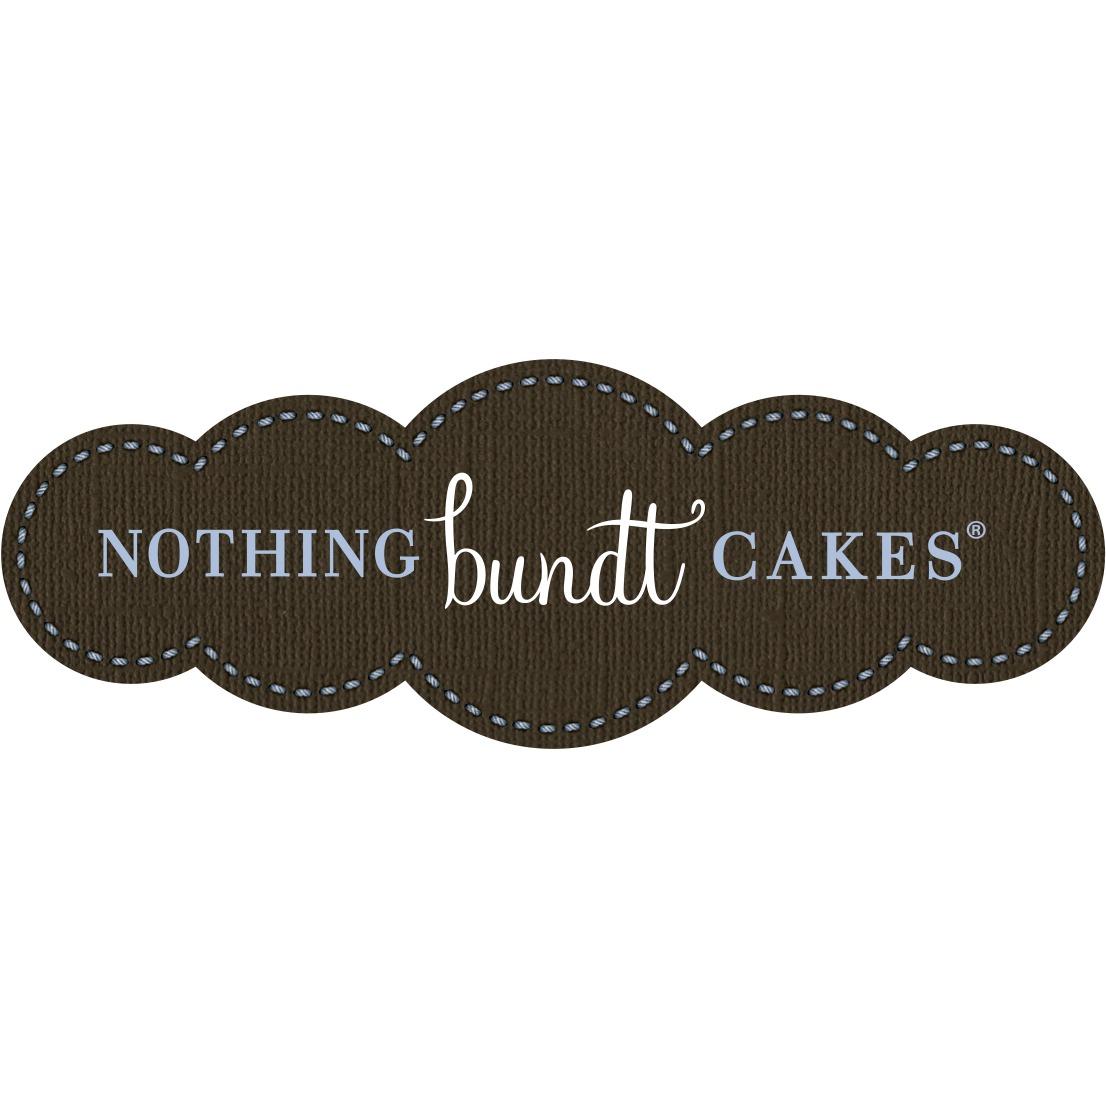 Nothing Bundt Cakes Coupons near me in Vernon Hills | 8coupons